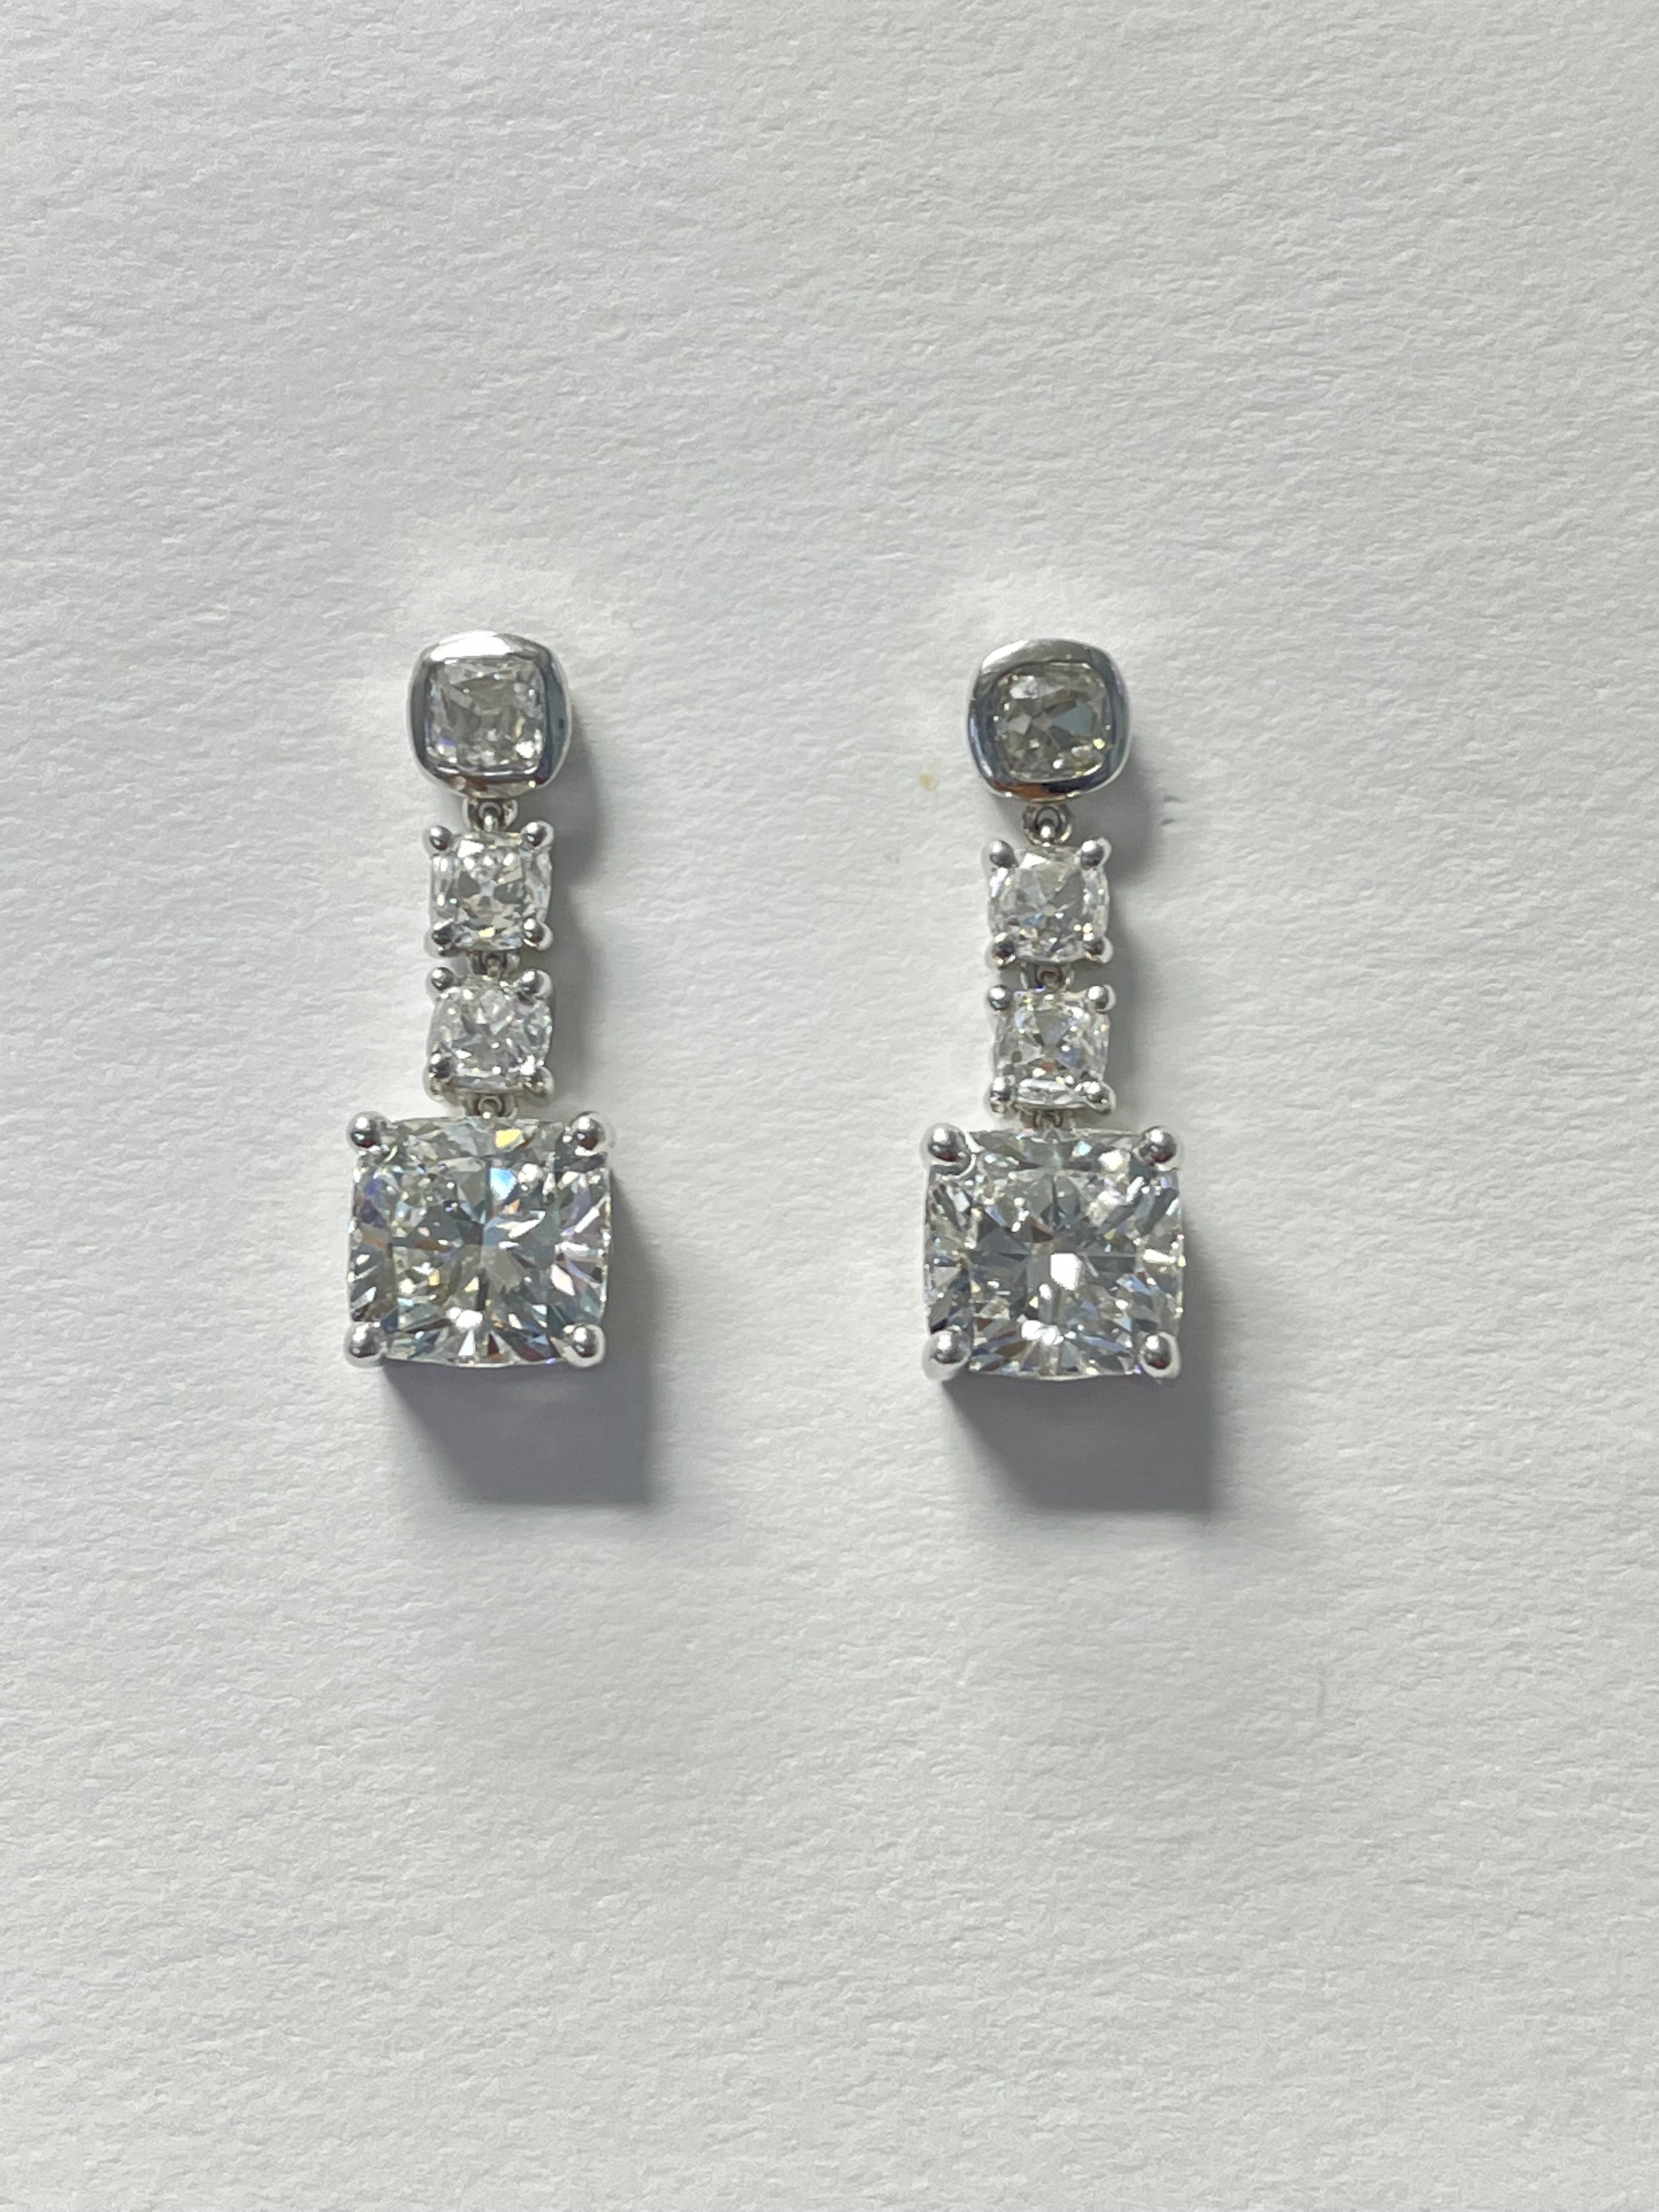 GIA Certified Cushion diamond three stone diamond dangle earrings beautifully handmade in platinum.
The details are as follow : 
Diamond weight: 4.03 carats ( 2.02 with F color and VS2 clarity ) ( 2.01 with E color and SI1 clarity ) 
Diamond weight